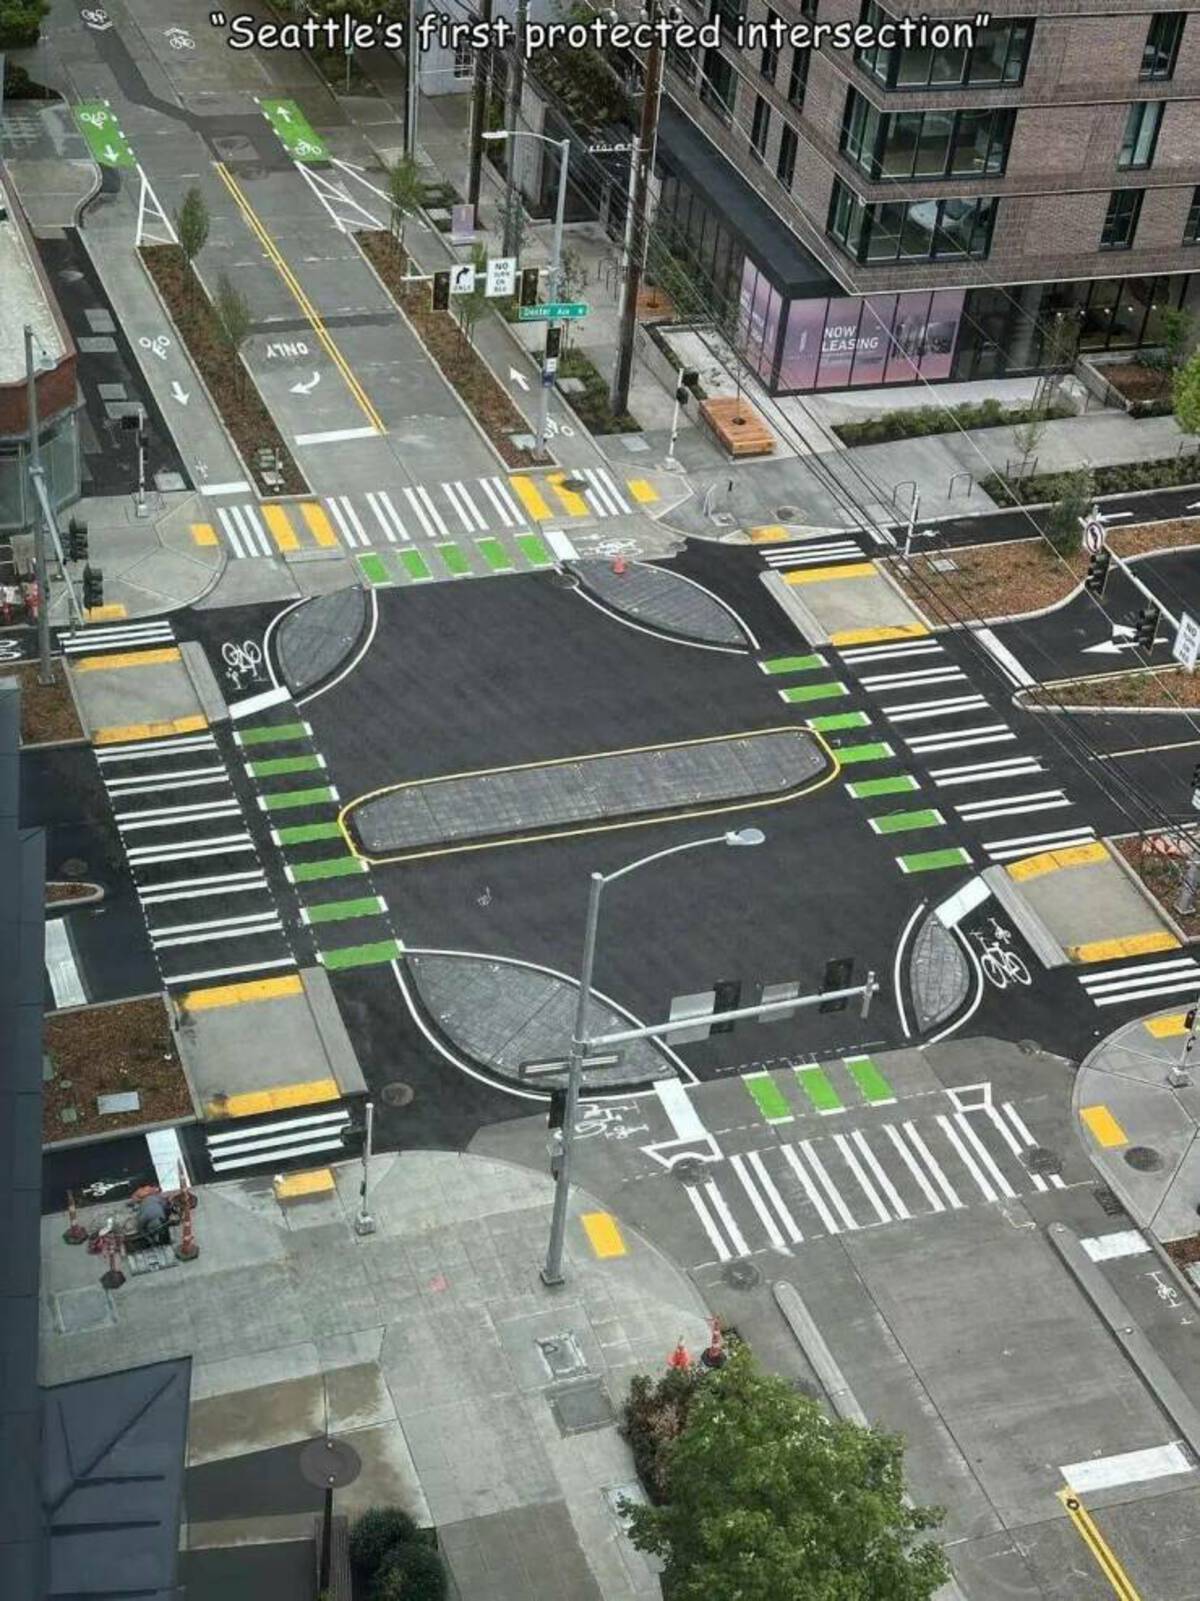 Protected intersection - "Seattle's first protected intersection" Dester A Atno Now Leasing